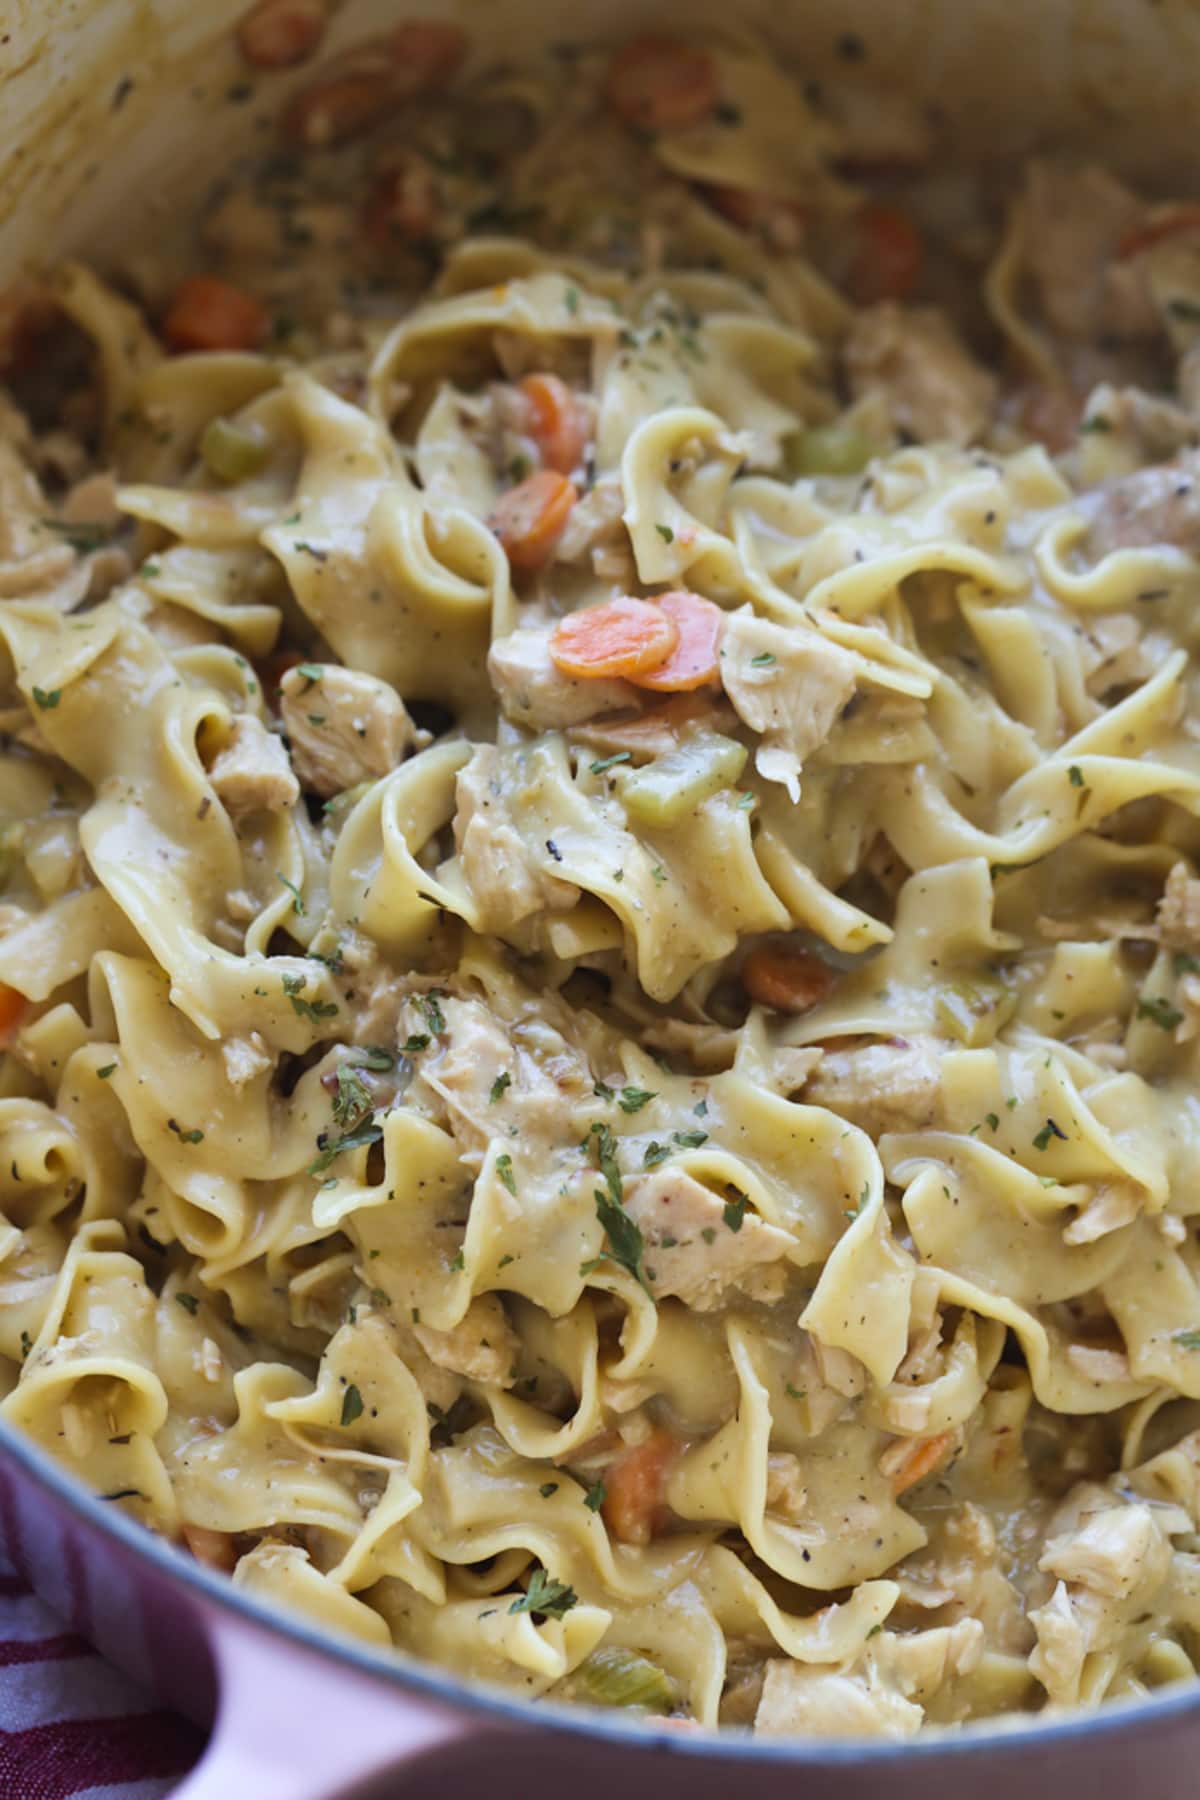 Egg noodles and chicken in a creamy sauce with carrots and seasoning